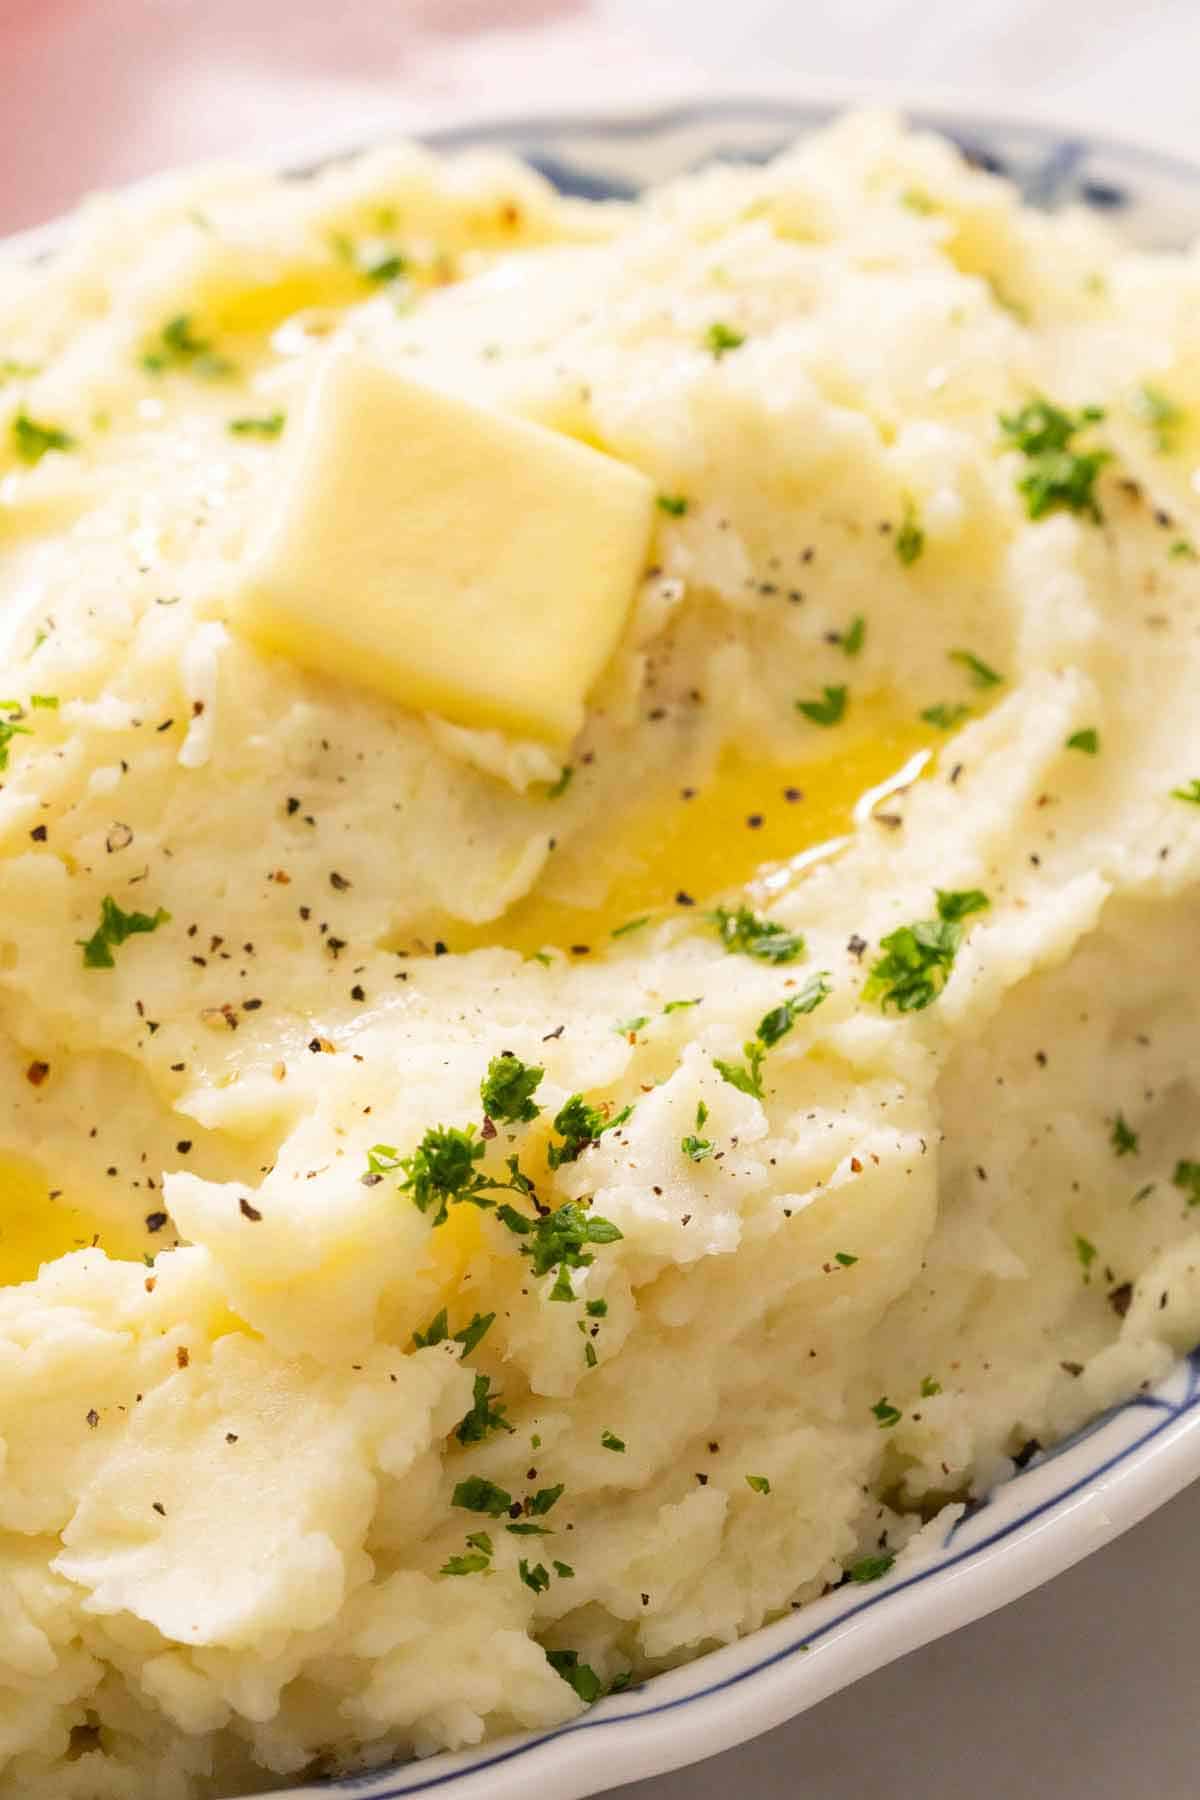 A close up view of mashed potatoes with a knob of softened butter on top along with chopped herbs.